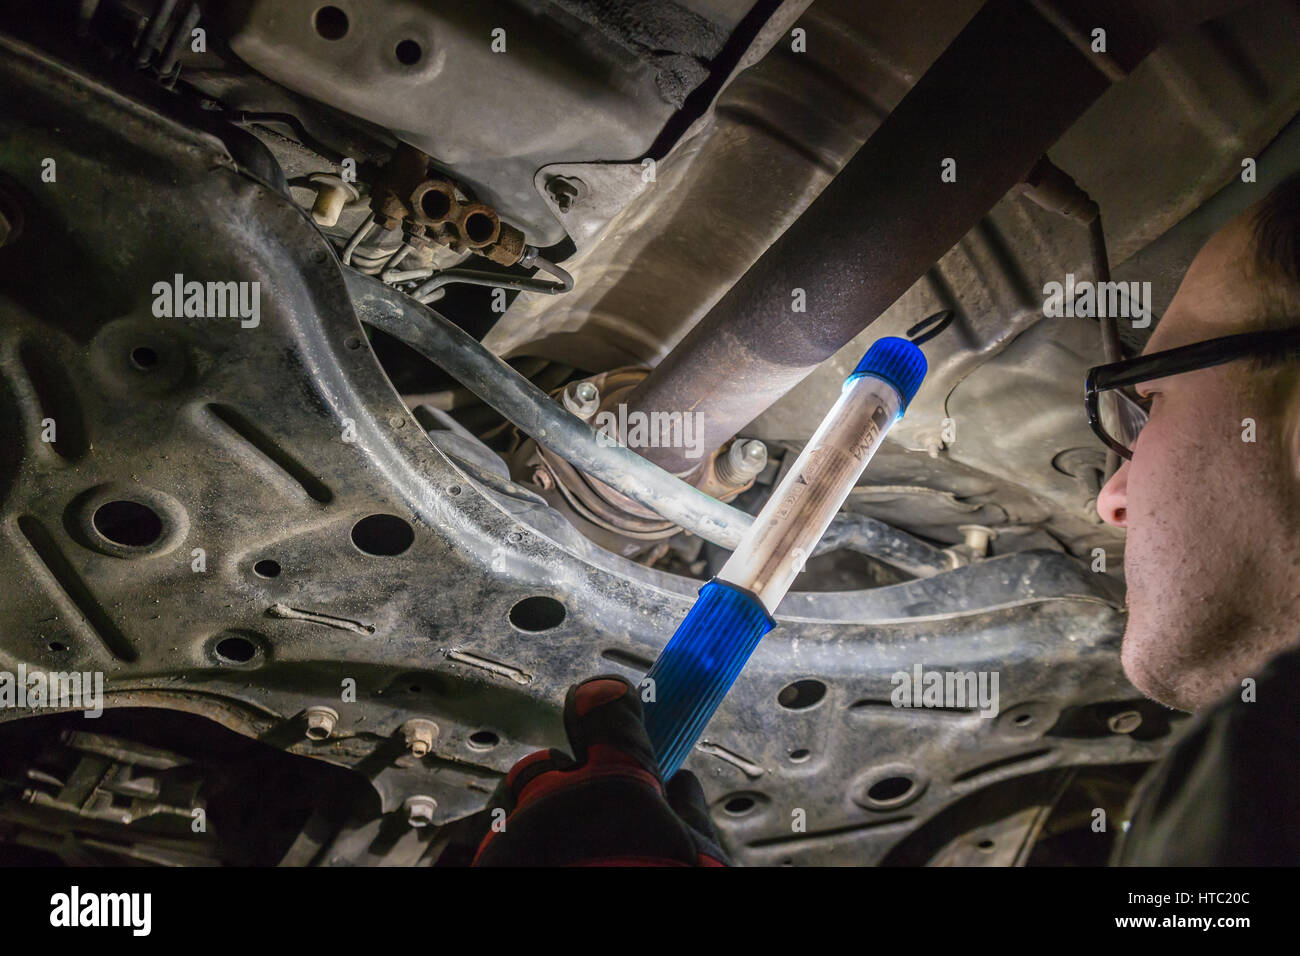 Car mechanic looking at car parts on the undercarriage. Stock Photo